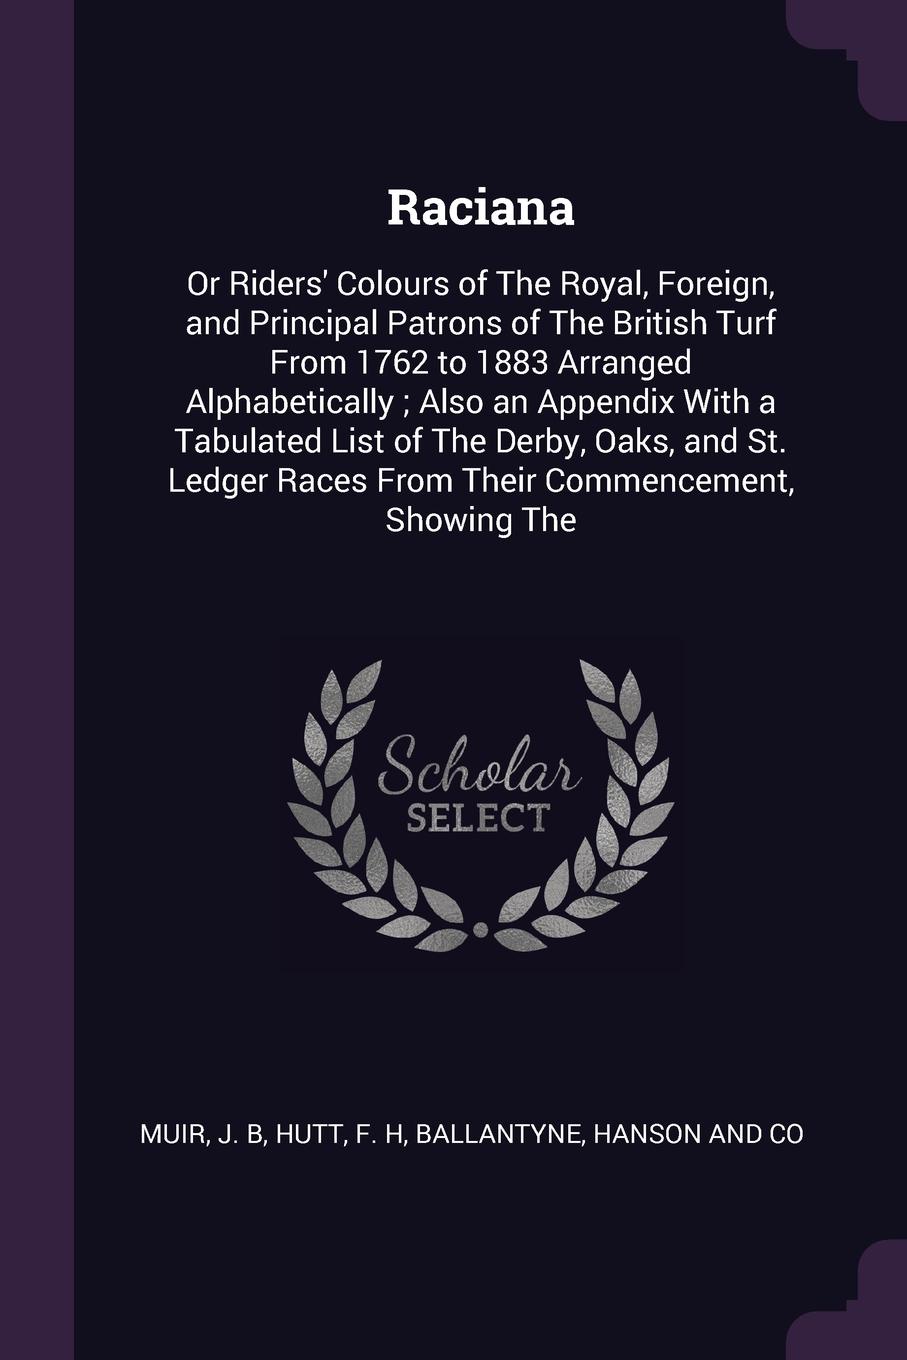 Raciana. Or Riders` Colours of The Royal, Foreign, and Principal Patrons of The British Turf From 1762 to 1883 Arranged Alphabetically ; Also an Appendix With a Tabulated List of The Derby, Oaks, and St. Ledger Races From Their Commencement, Showi...